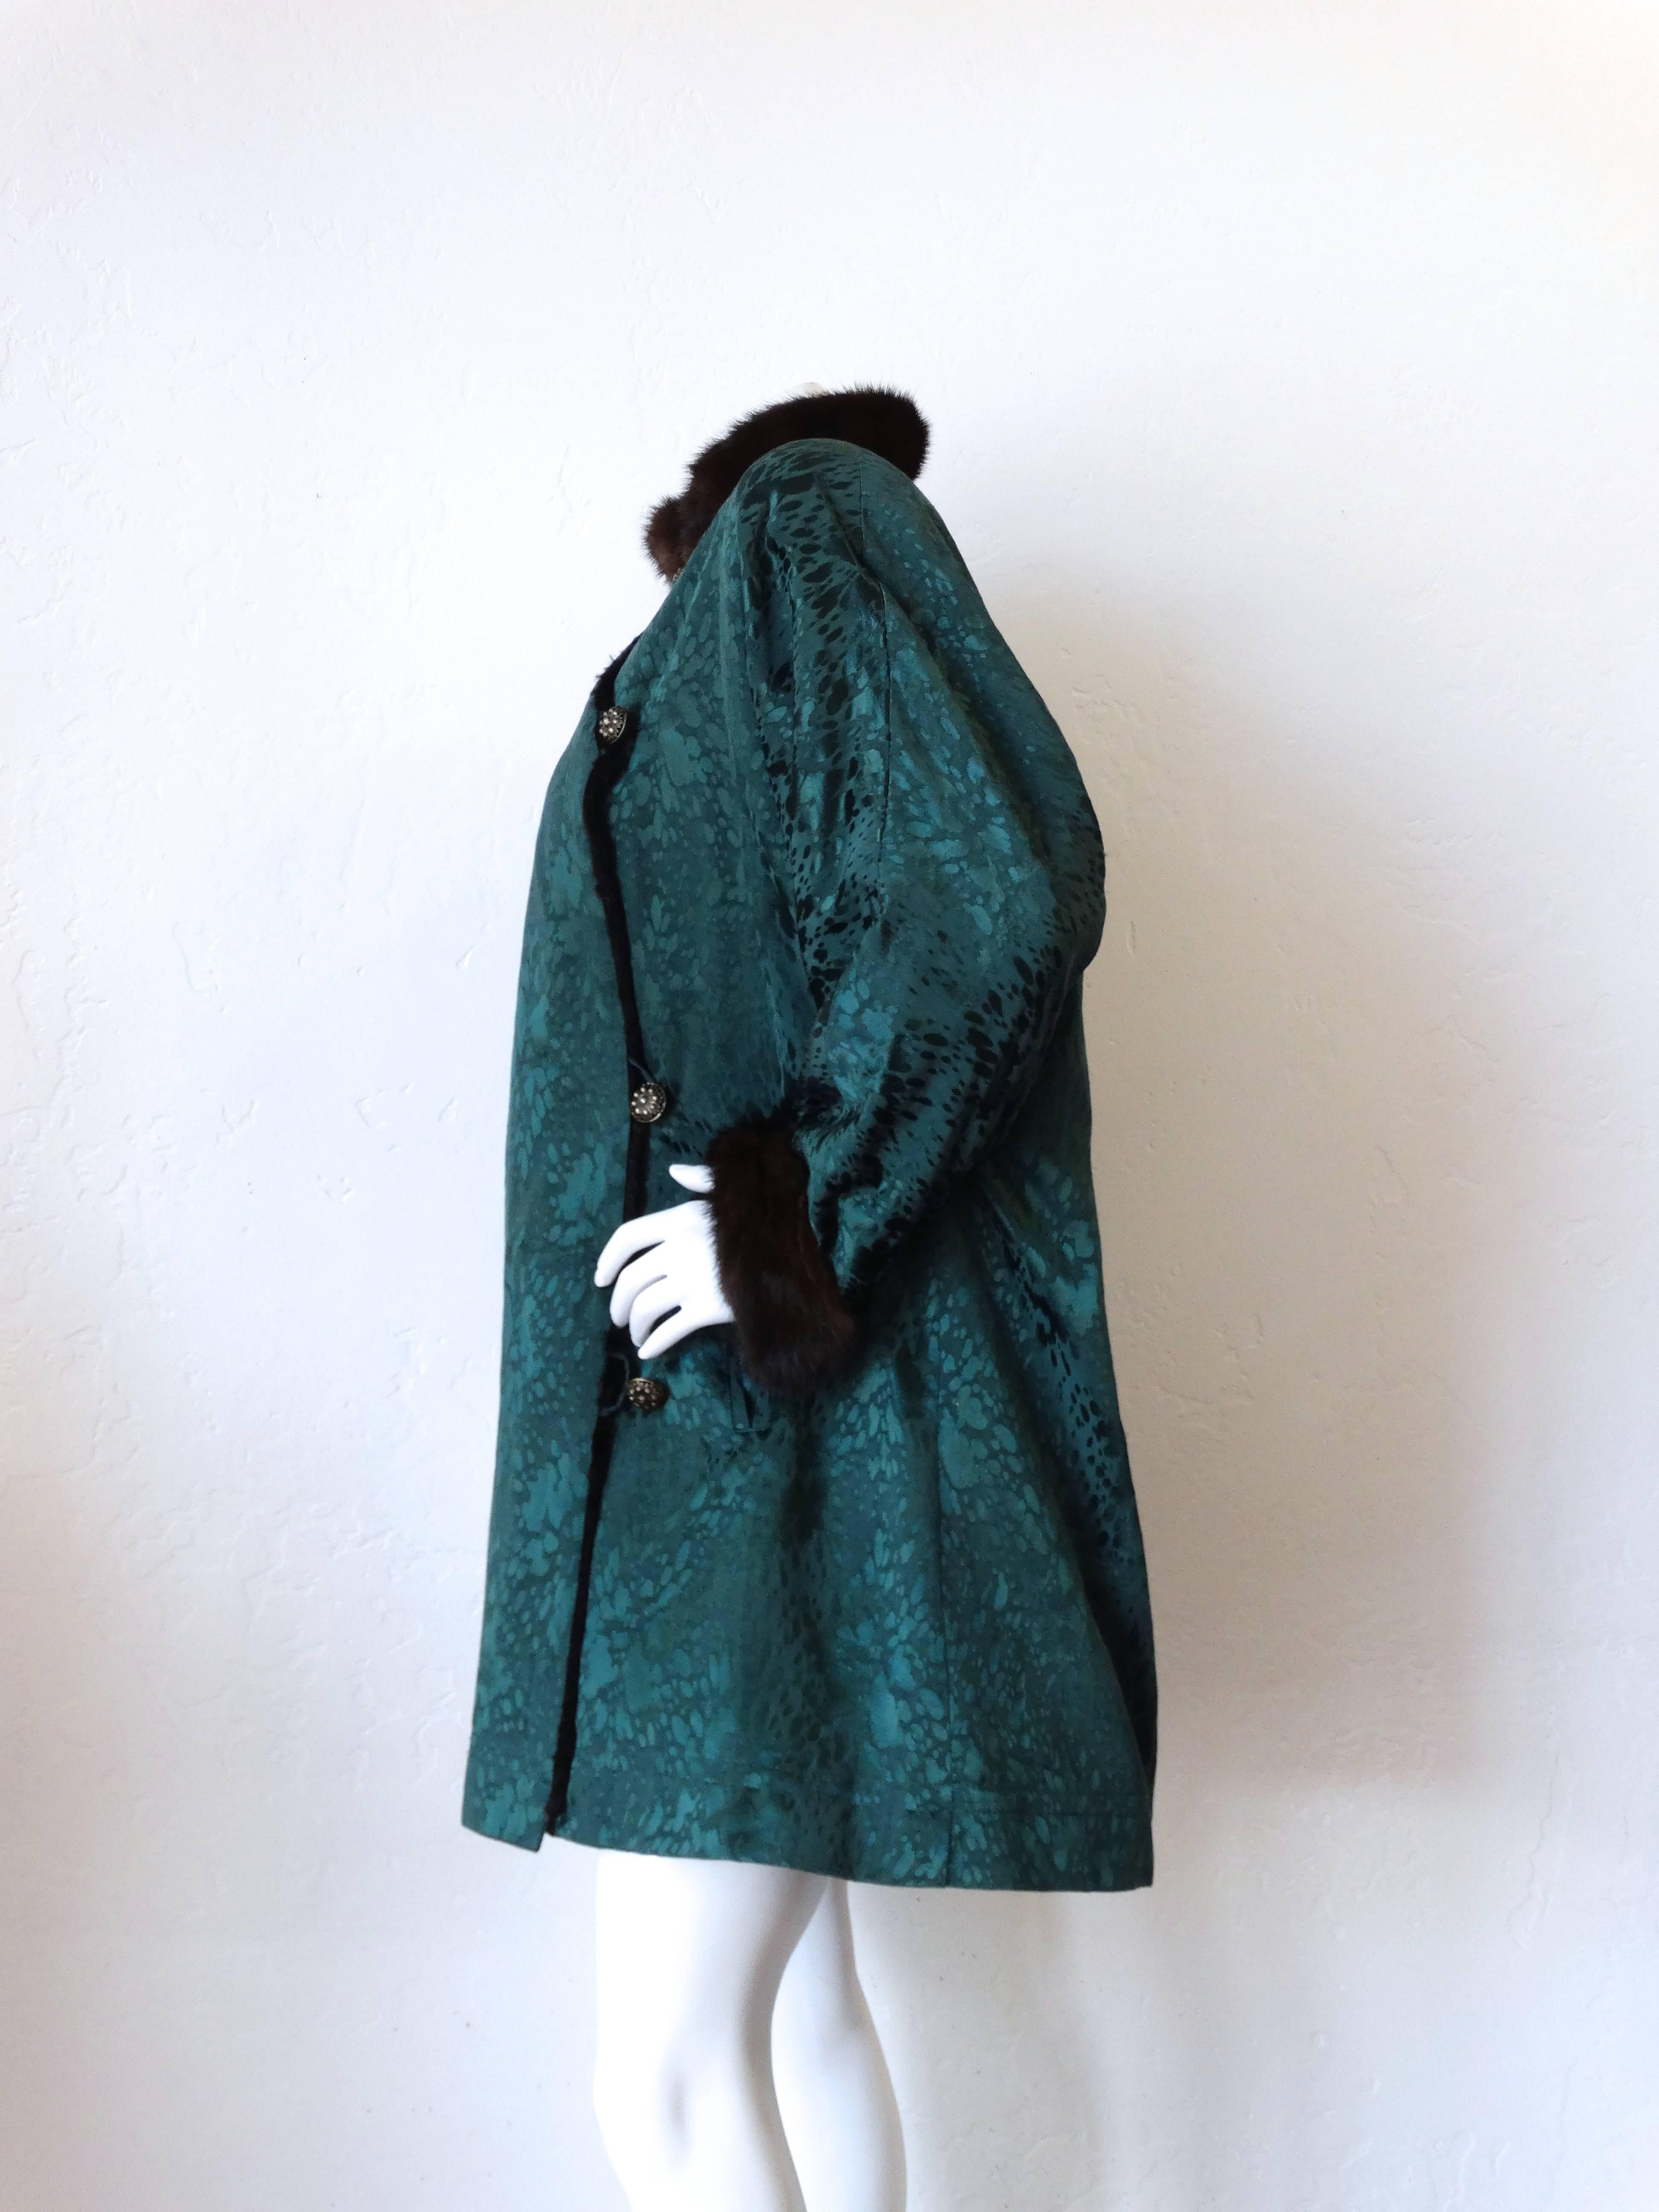 Chic 1980s Yves Saint Laurent Fur Lined Coat. Forest green silk fabric. Sheared mink interior. Mink cuffs and collar. Single breasted button closures up the front. Pockets at either side of the waist. Fits a todays size 6 or 8 